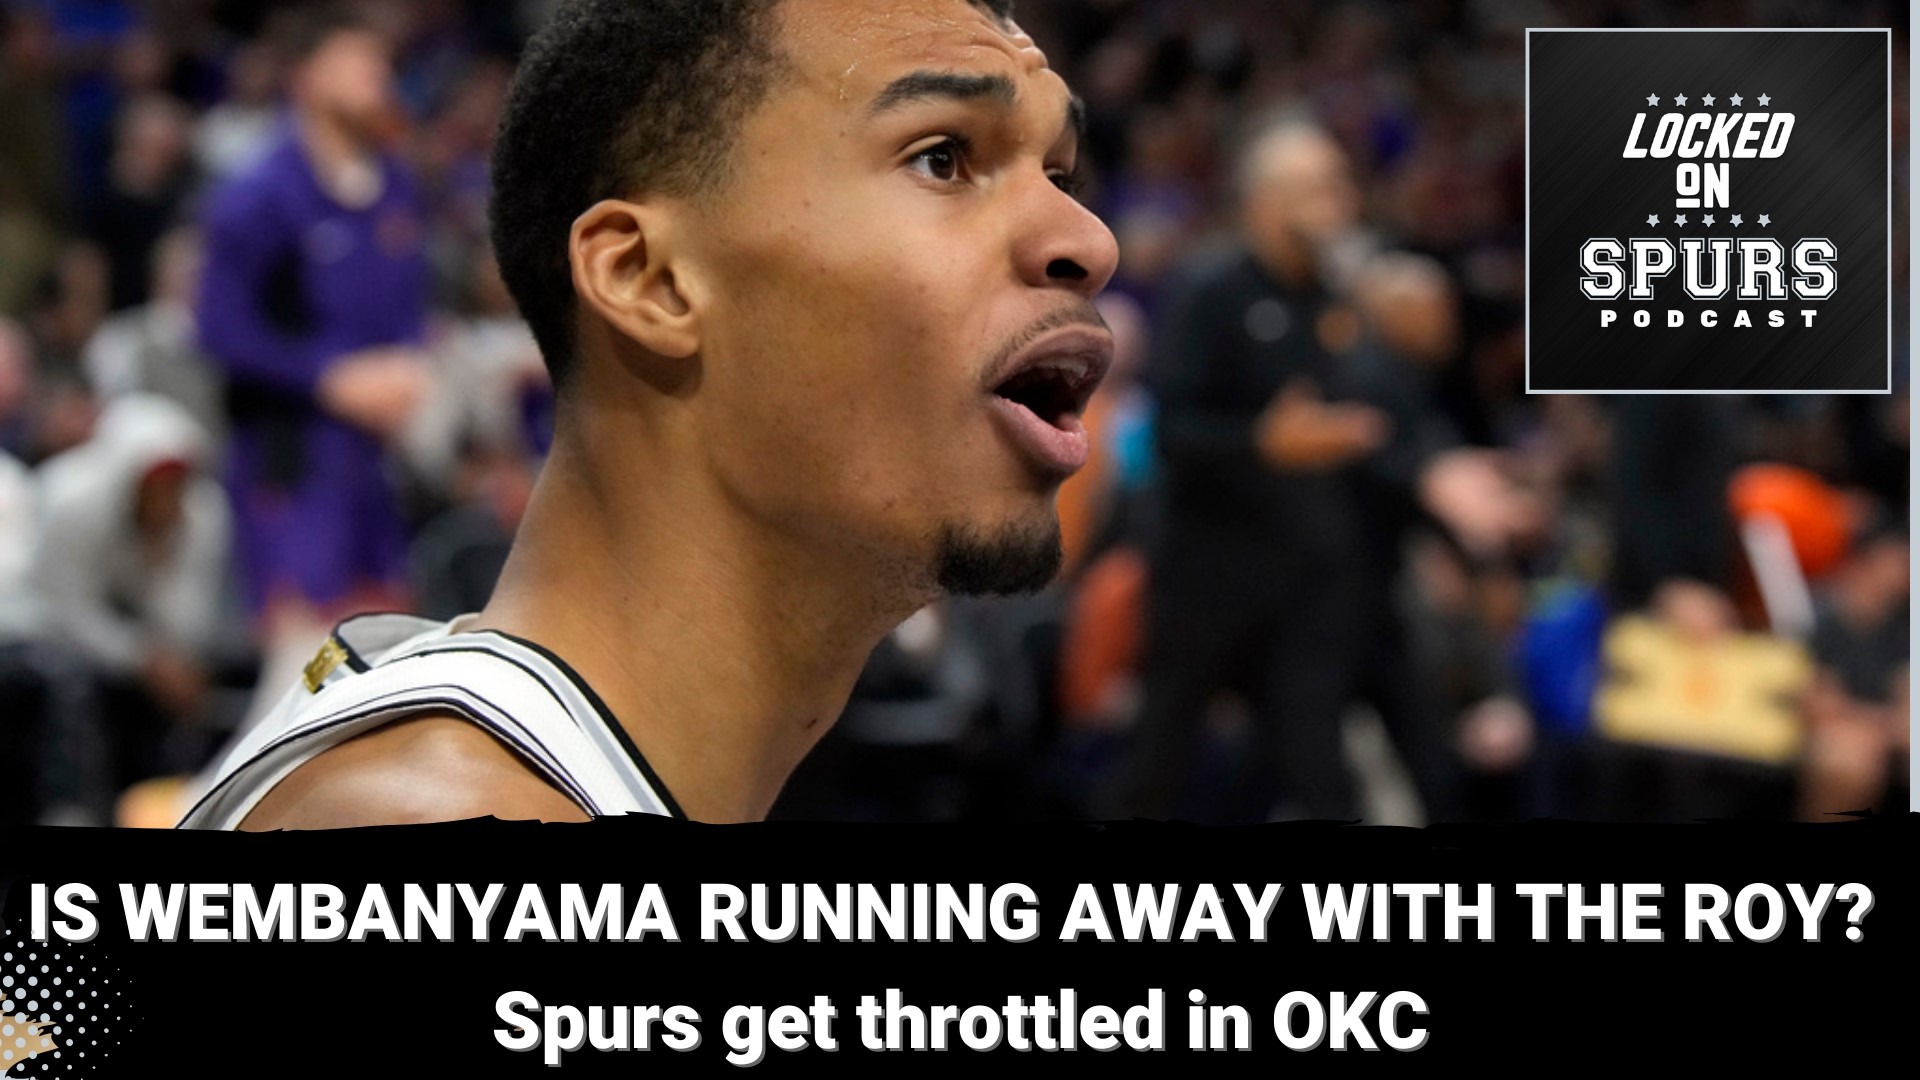 Also, the Spurs get stomped in Oklahoma City.